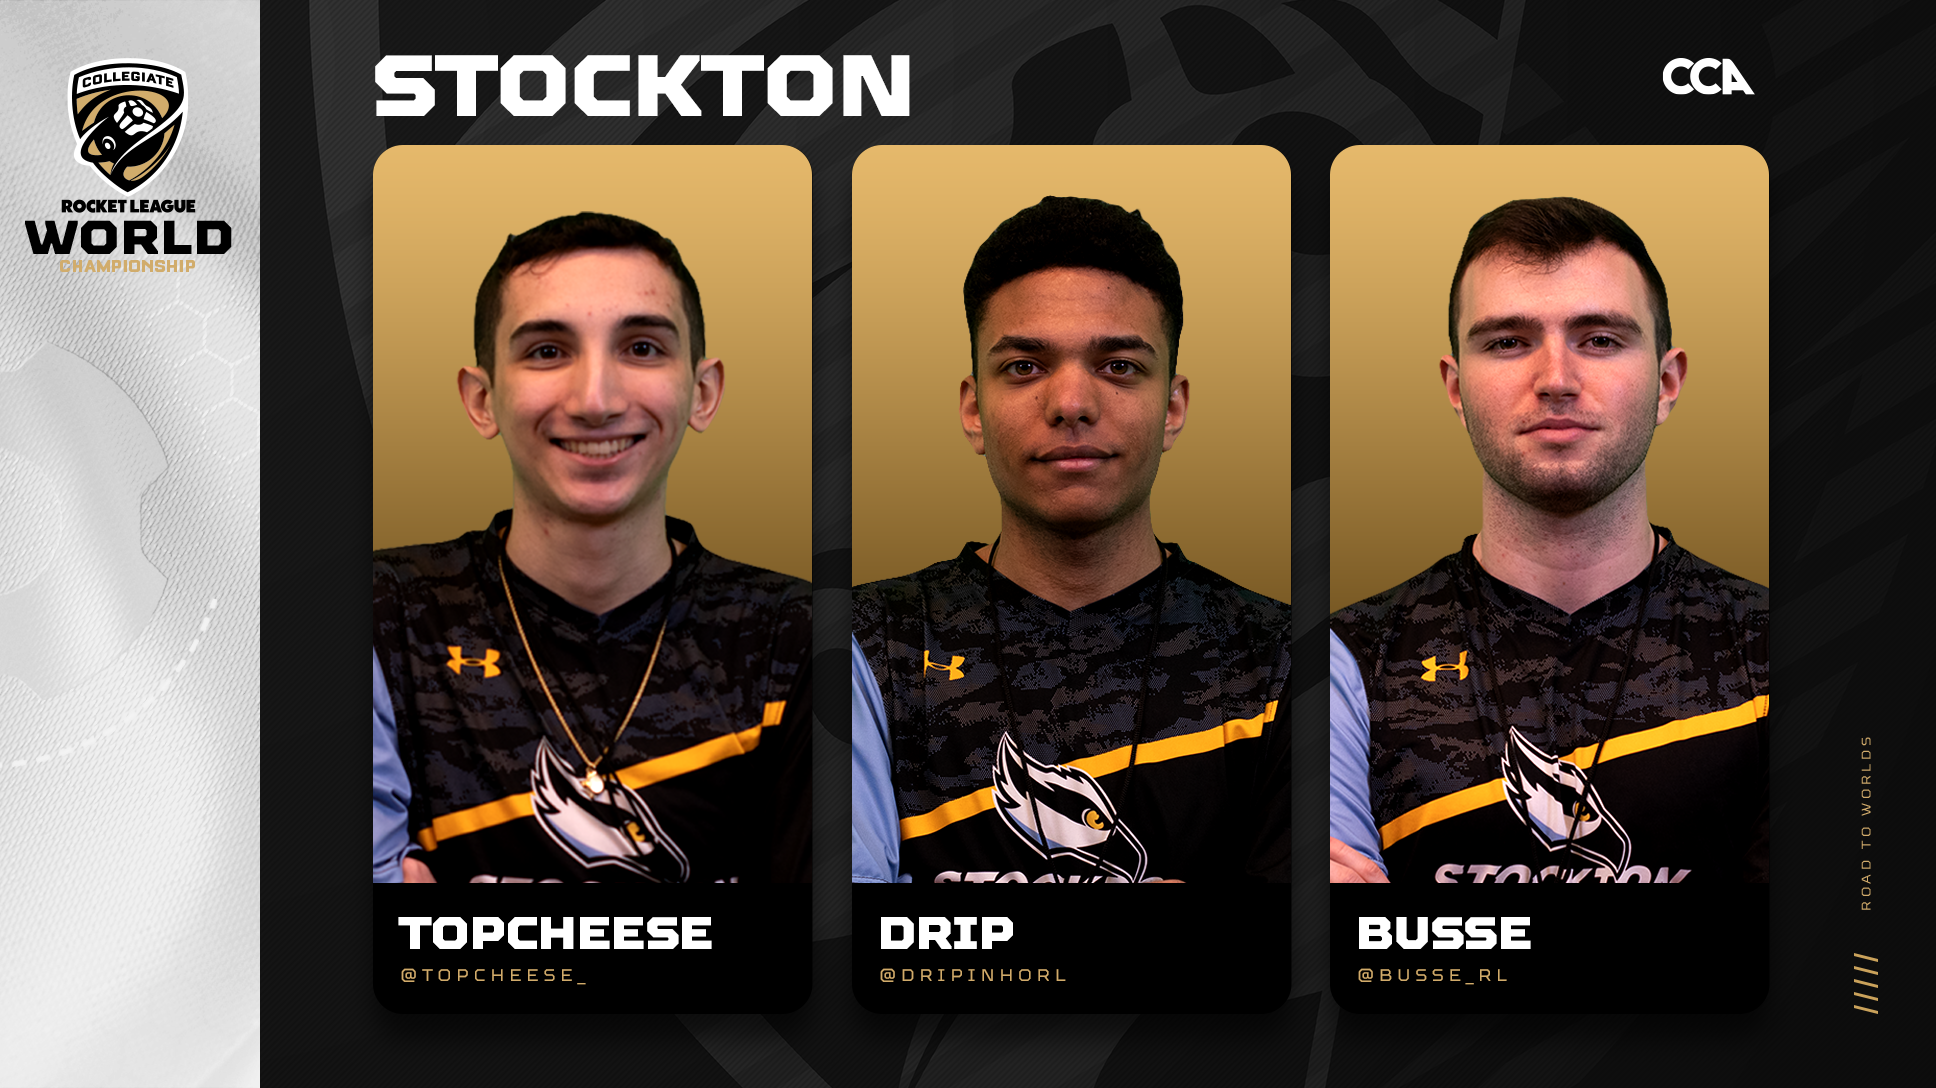 Technical University of Berlin Road to Worlds header with images of TopCheese, Drip, and Busse.